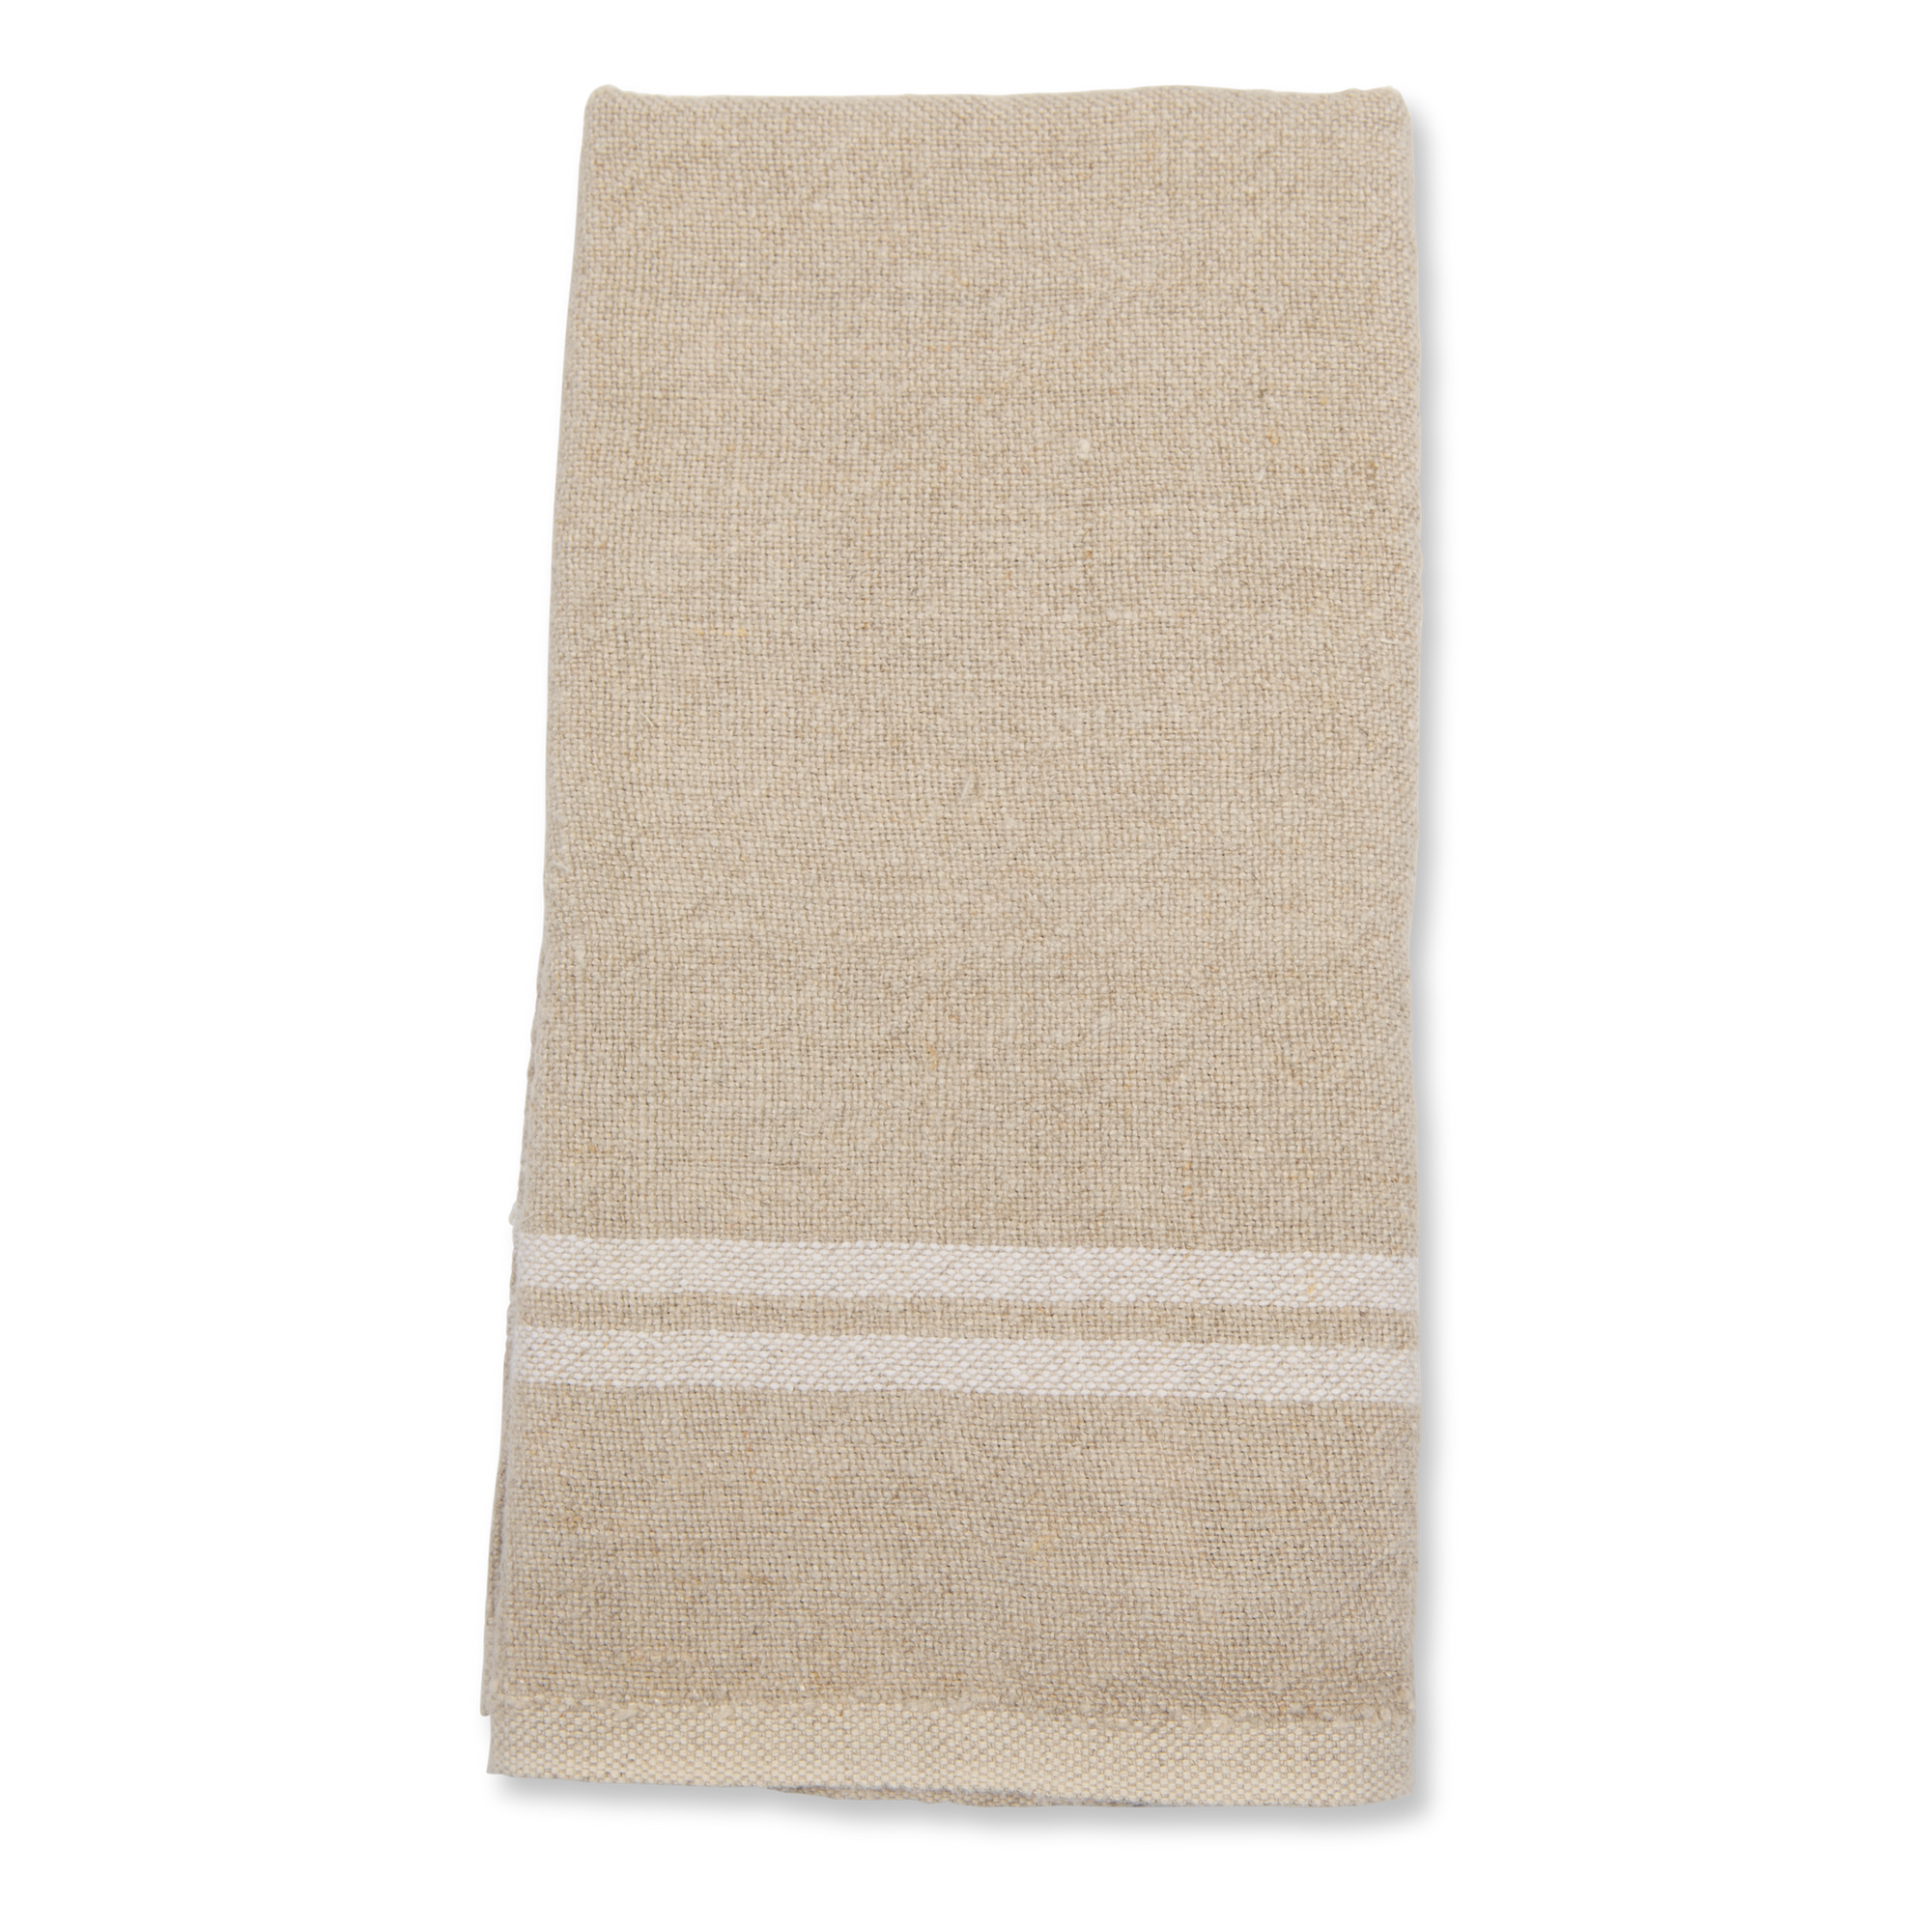 The Vintage Linen Towels are finely crafted French tea towels that can perk up a kitchen towel rack, line a bread or picnic basket, or nestle the arm of a pitcher of your favourite